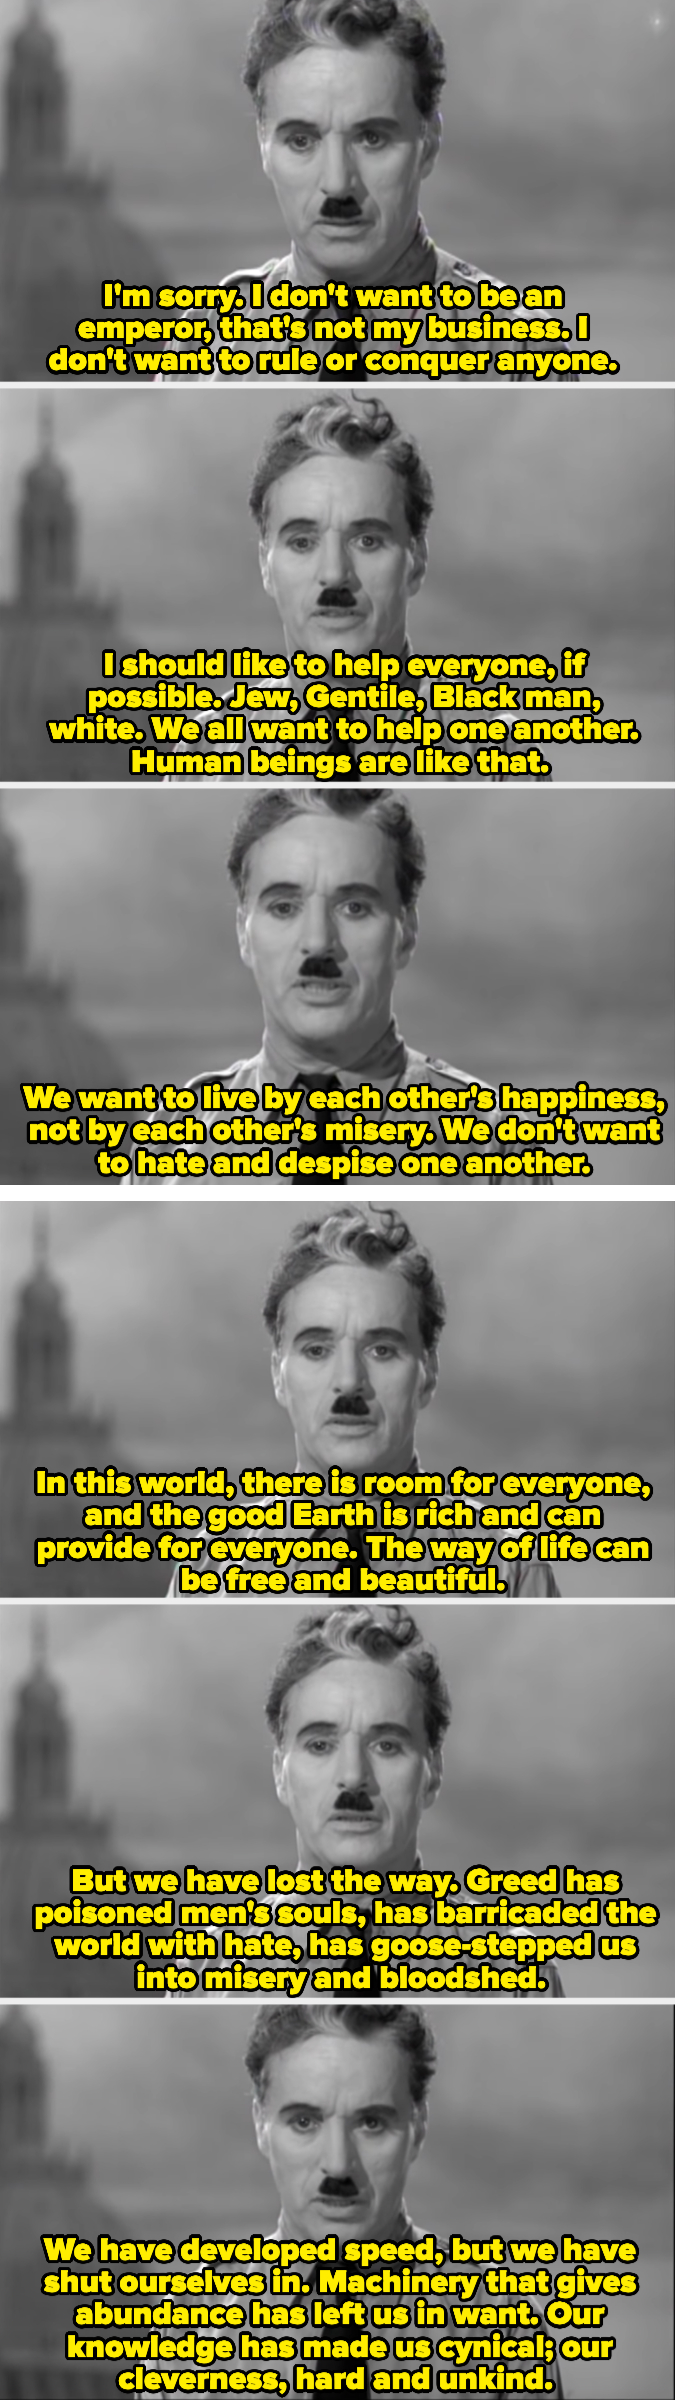 Charlie Chaplin talks about how greed has ruined humanity, and how our natural instinct is to take care of one another